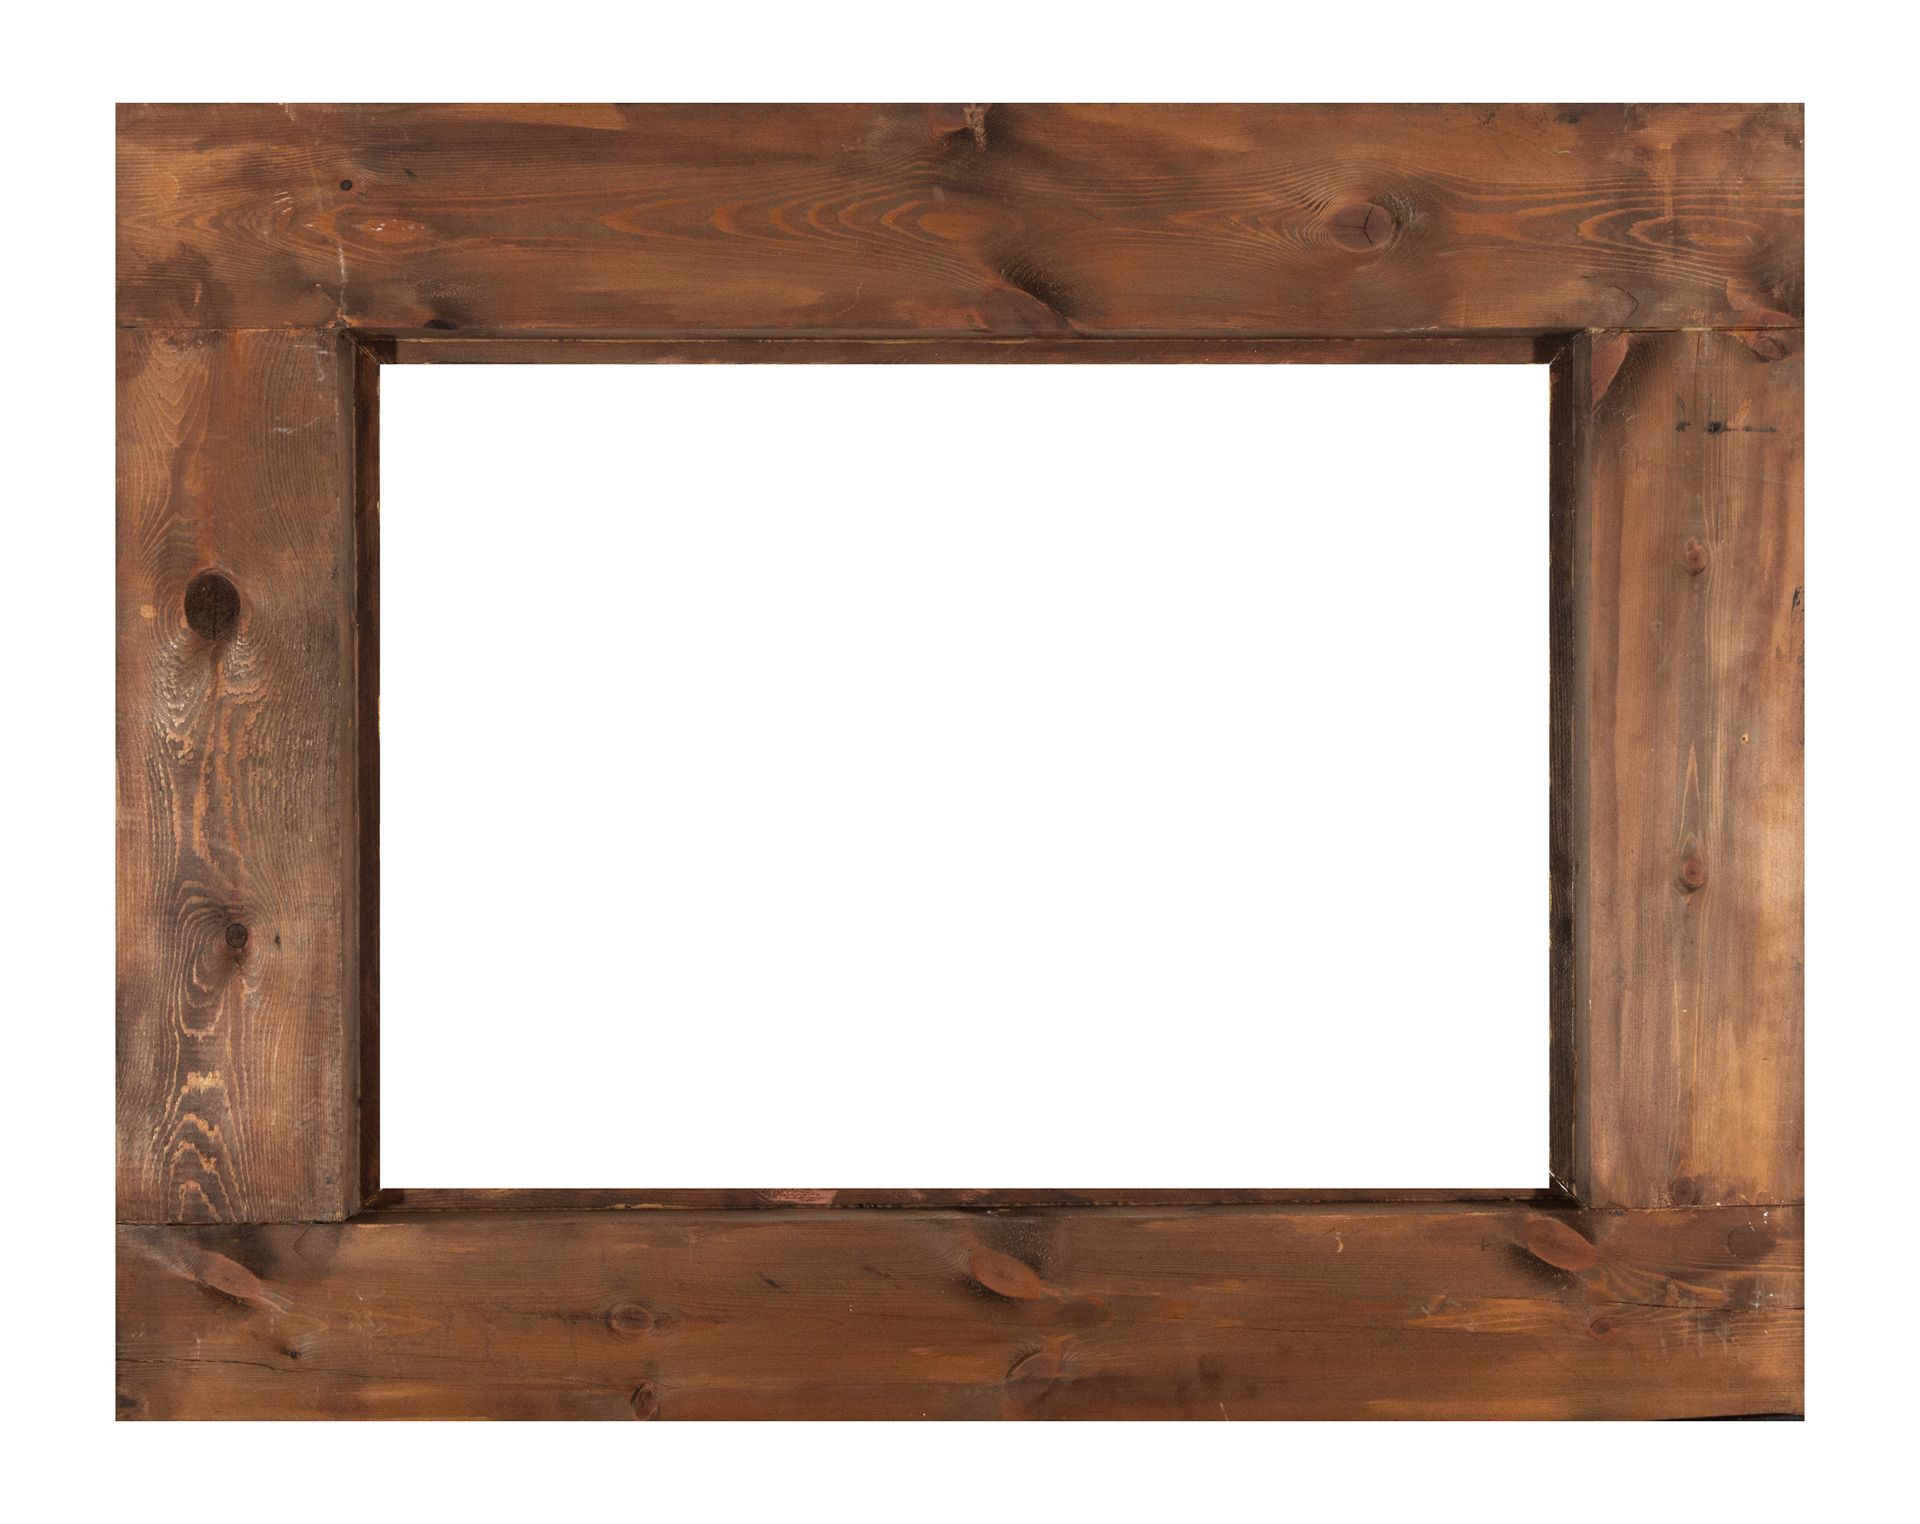 Spanish Baroque style frame in ebonized wood and carved gilt edges, 19th century - Image 2 of 2